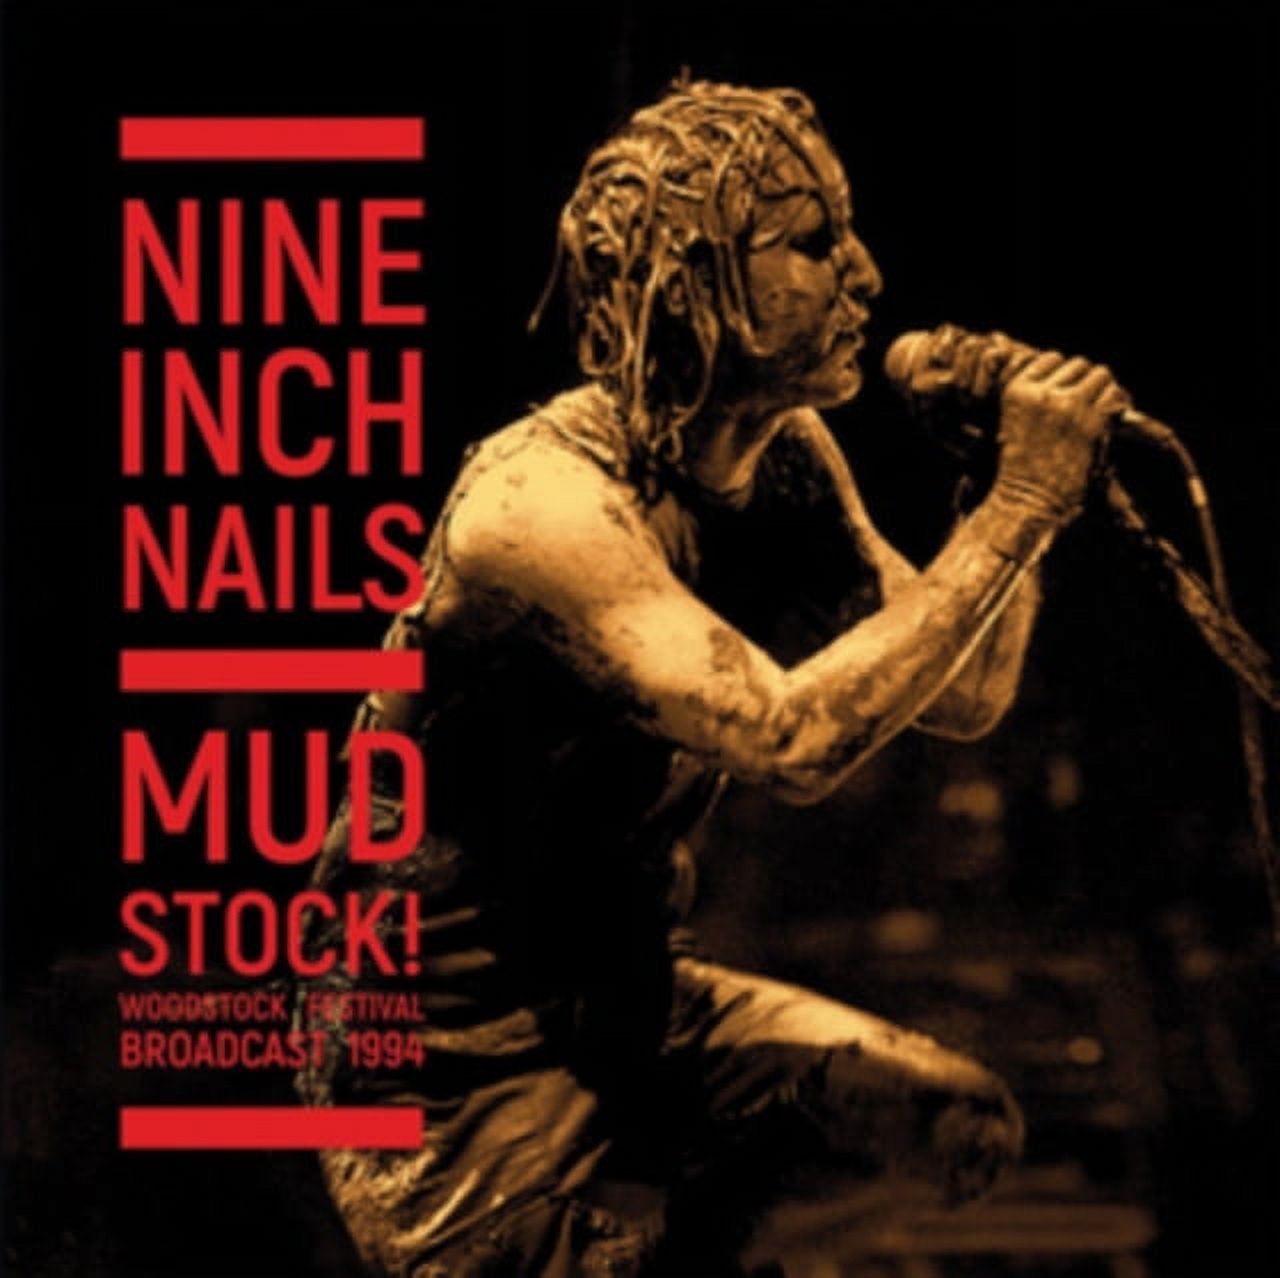 Trent Reznor, lead singer of Nine Inch Nails, performs covered in mud from  the afternoon downpour